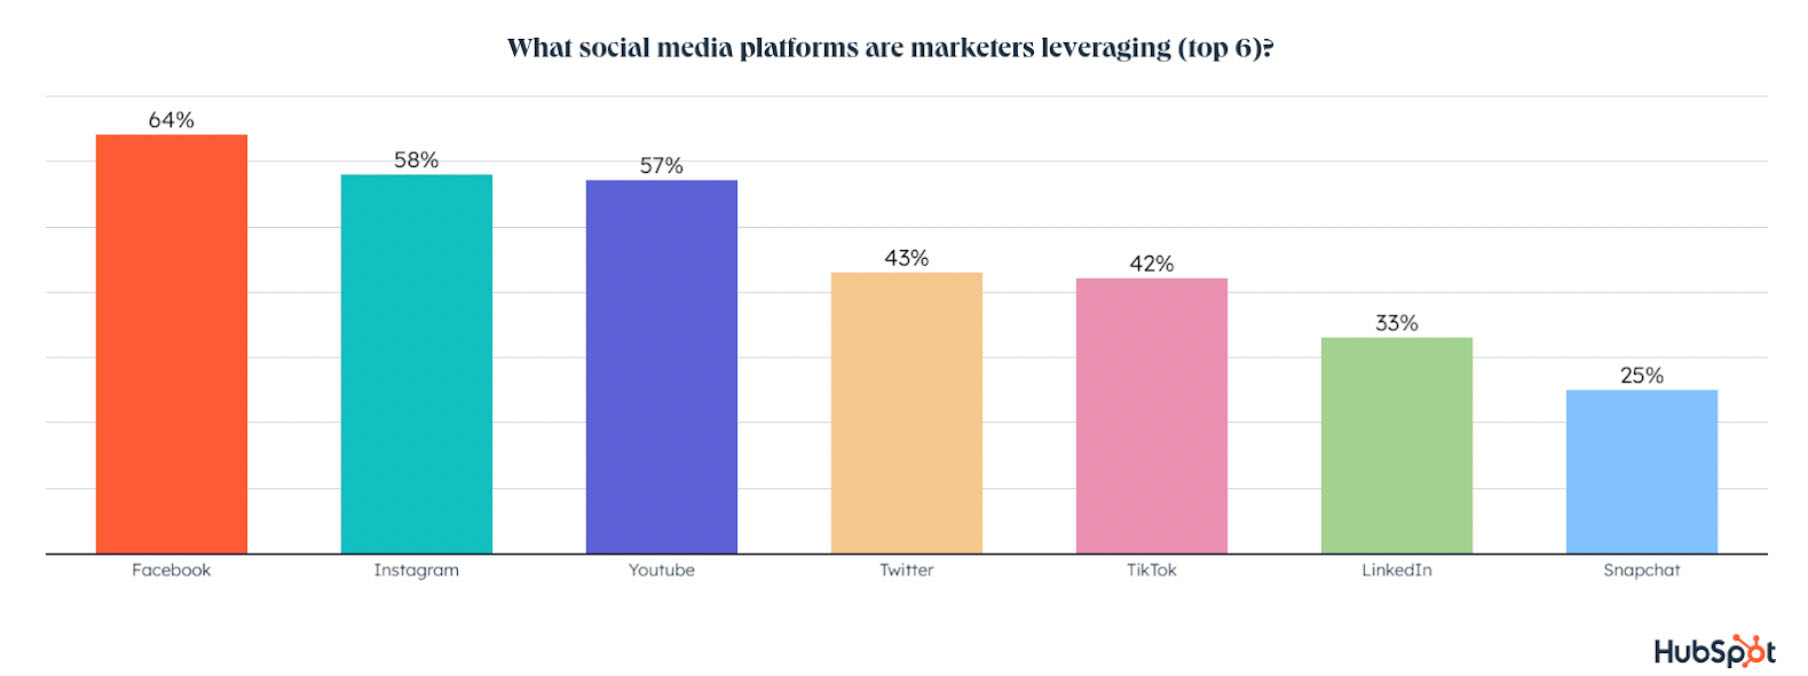 top 6 social media platforms marketers are leveraging